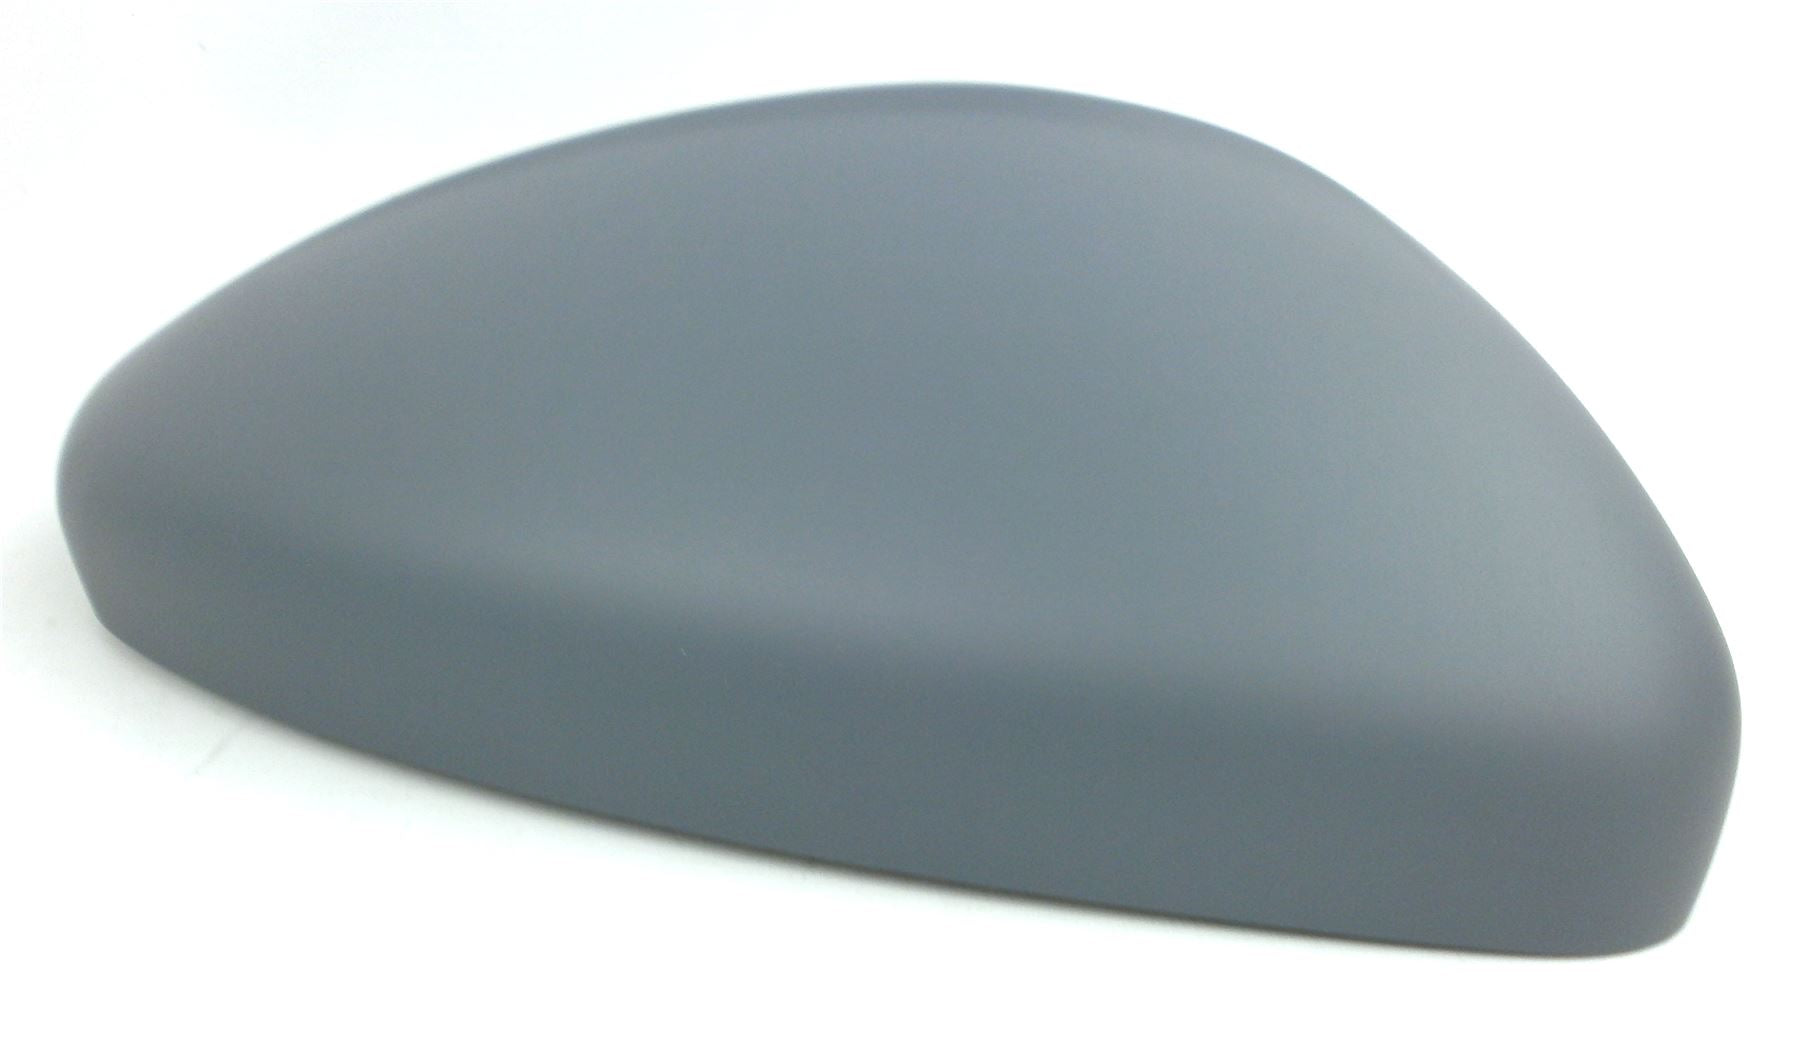 Peugeot 2008 2012+ Primed Wing Mirror Cover Driver Side O/S